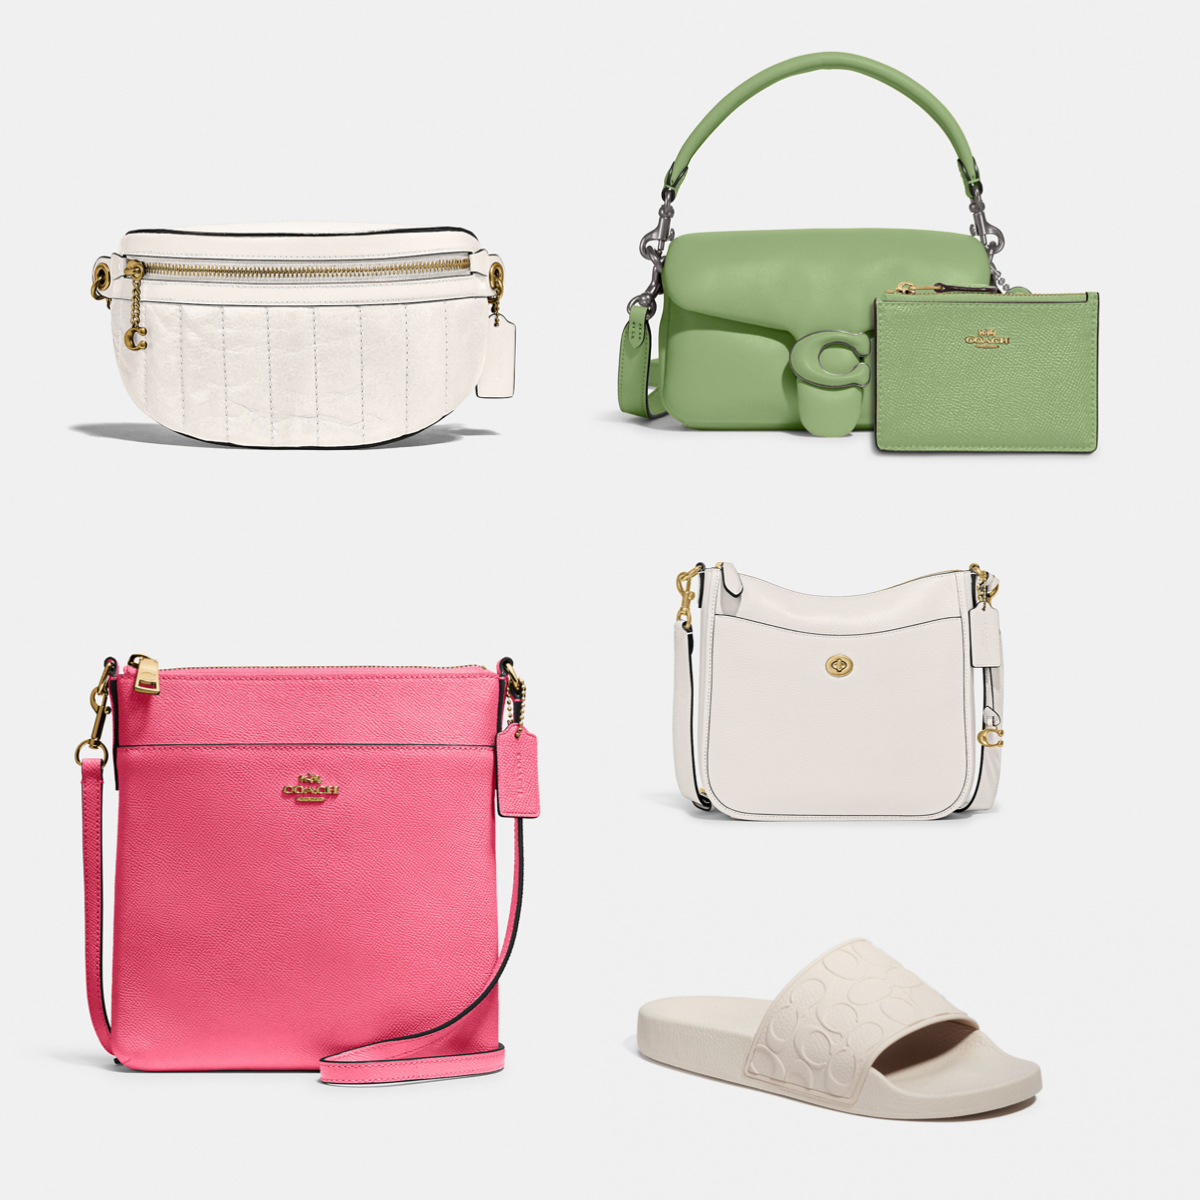 Coach’s Spring Sale: Score Best-Selling Bags & More for as Low as $26